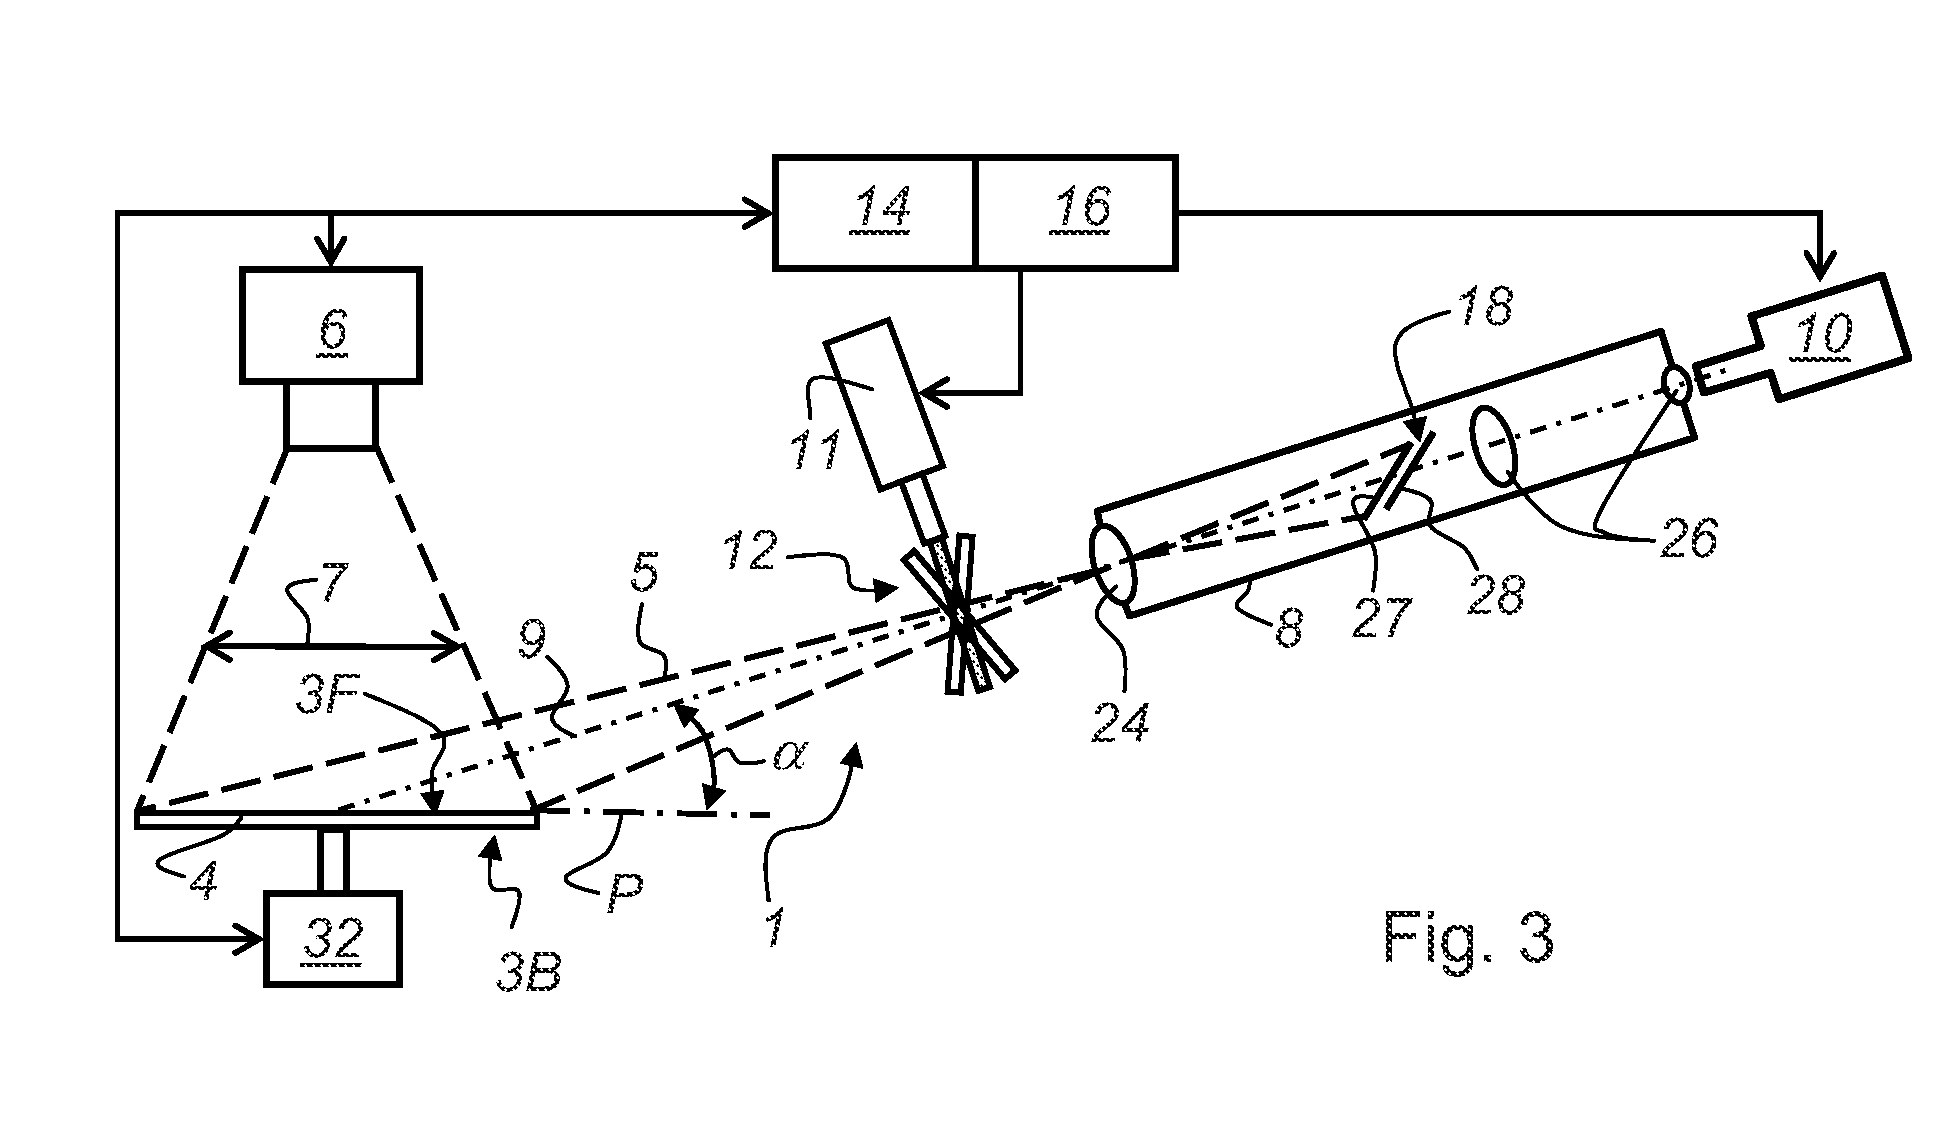 Apparatus and method for three dimensional inspection of wafer saw marks